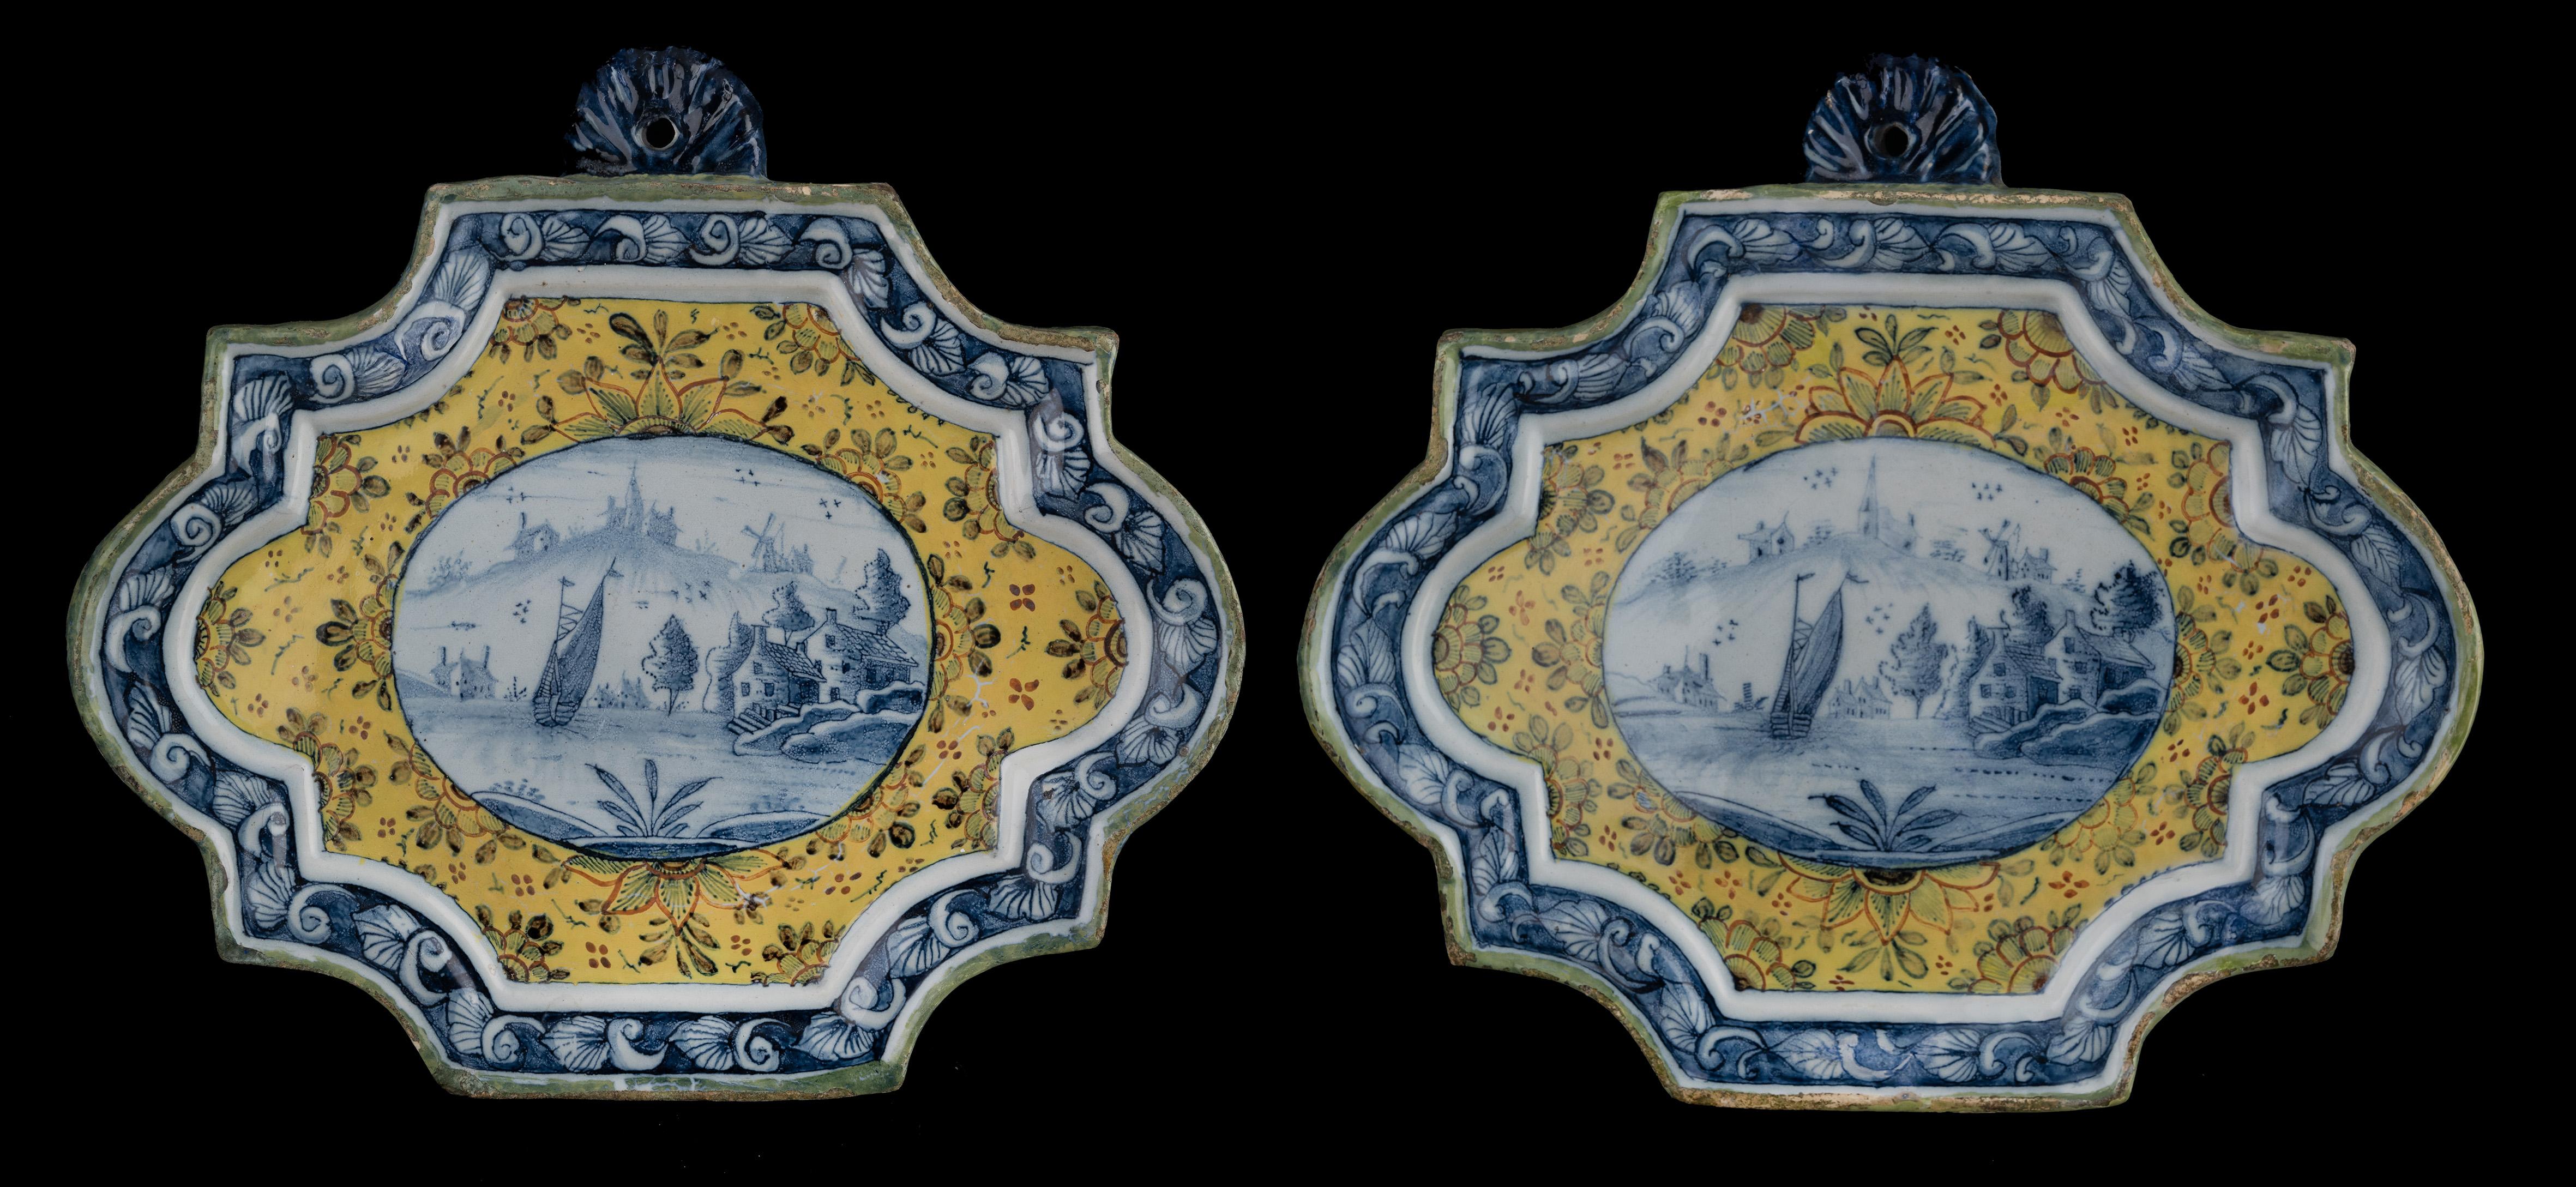 Two polychrome plaques with landscapes. Delft, 1750-1770

The plaques have a rectangular shape with indented corners and semi-circular sides. The rim is modelled in relief and has a semi-circular, profiled suspension loophole at the top. A blue and